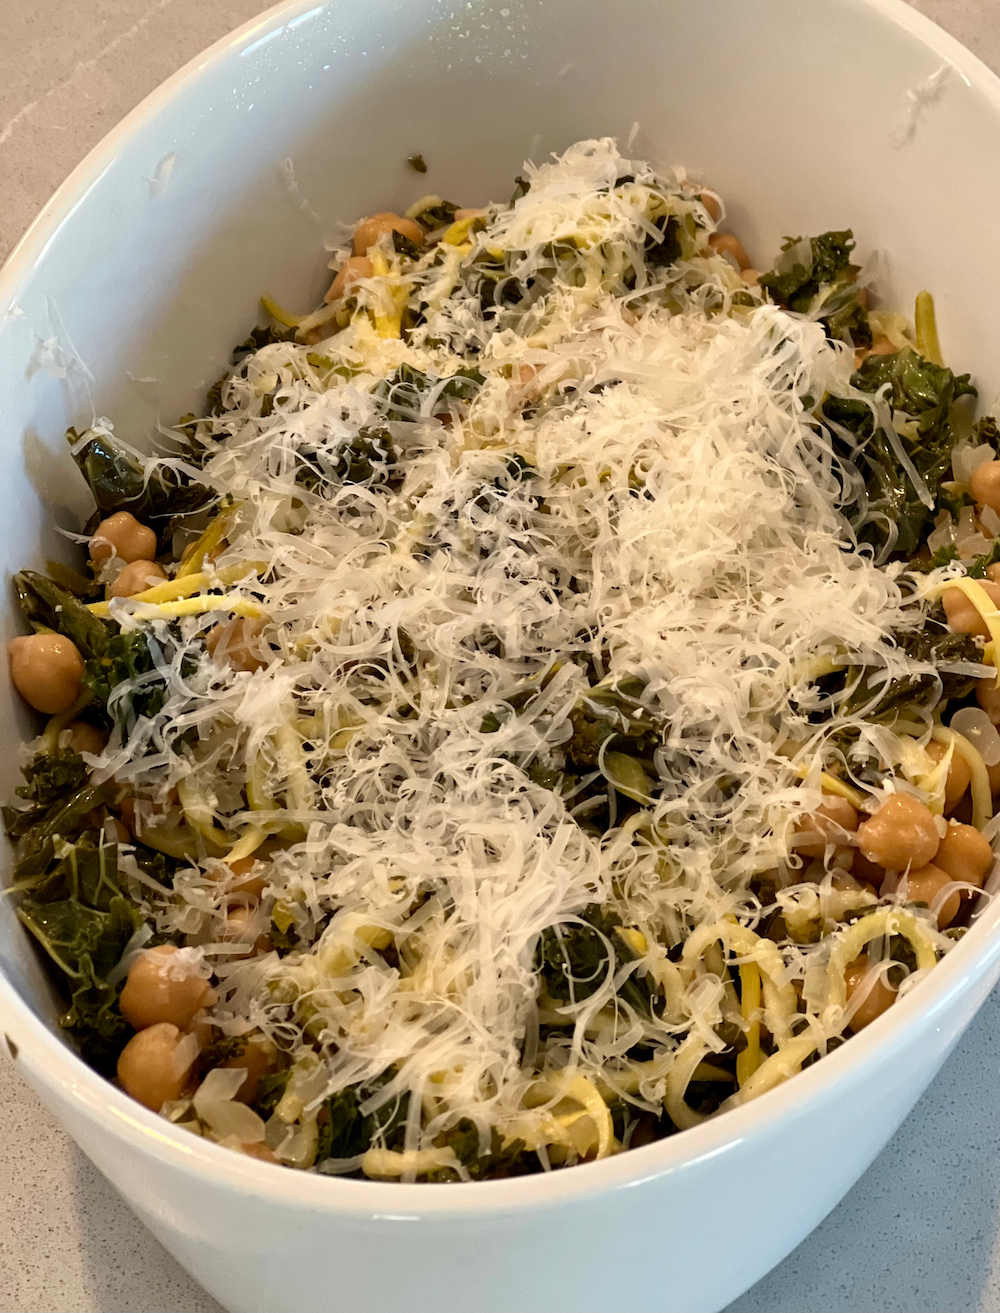 Zucchini Pasta, Kale and Chickpeas